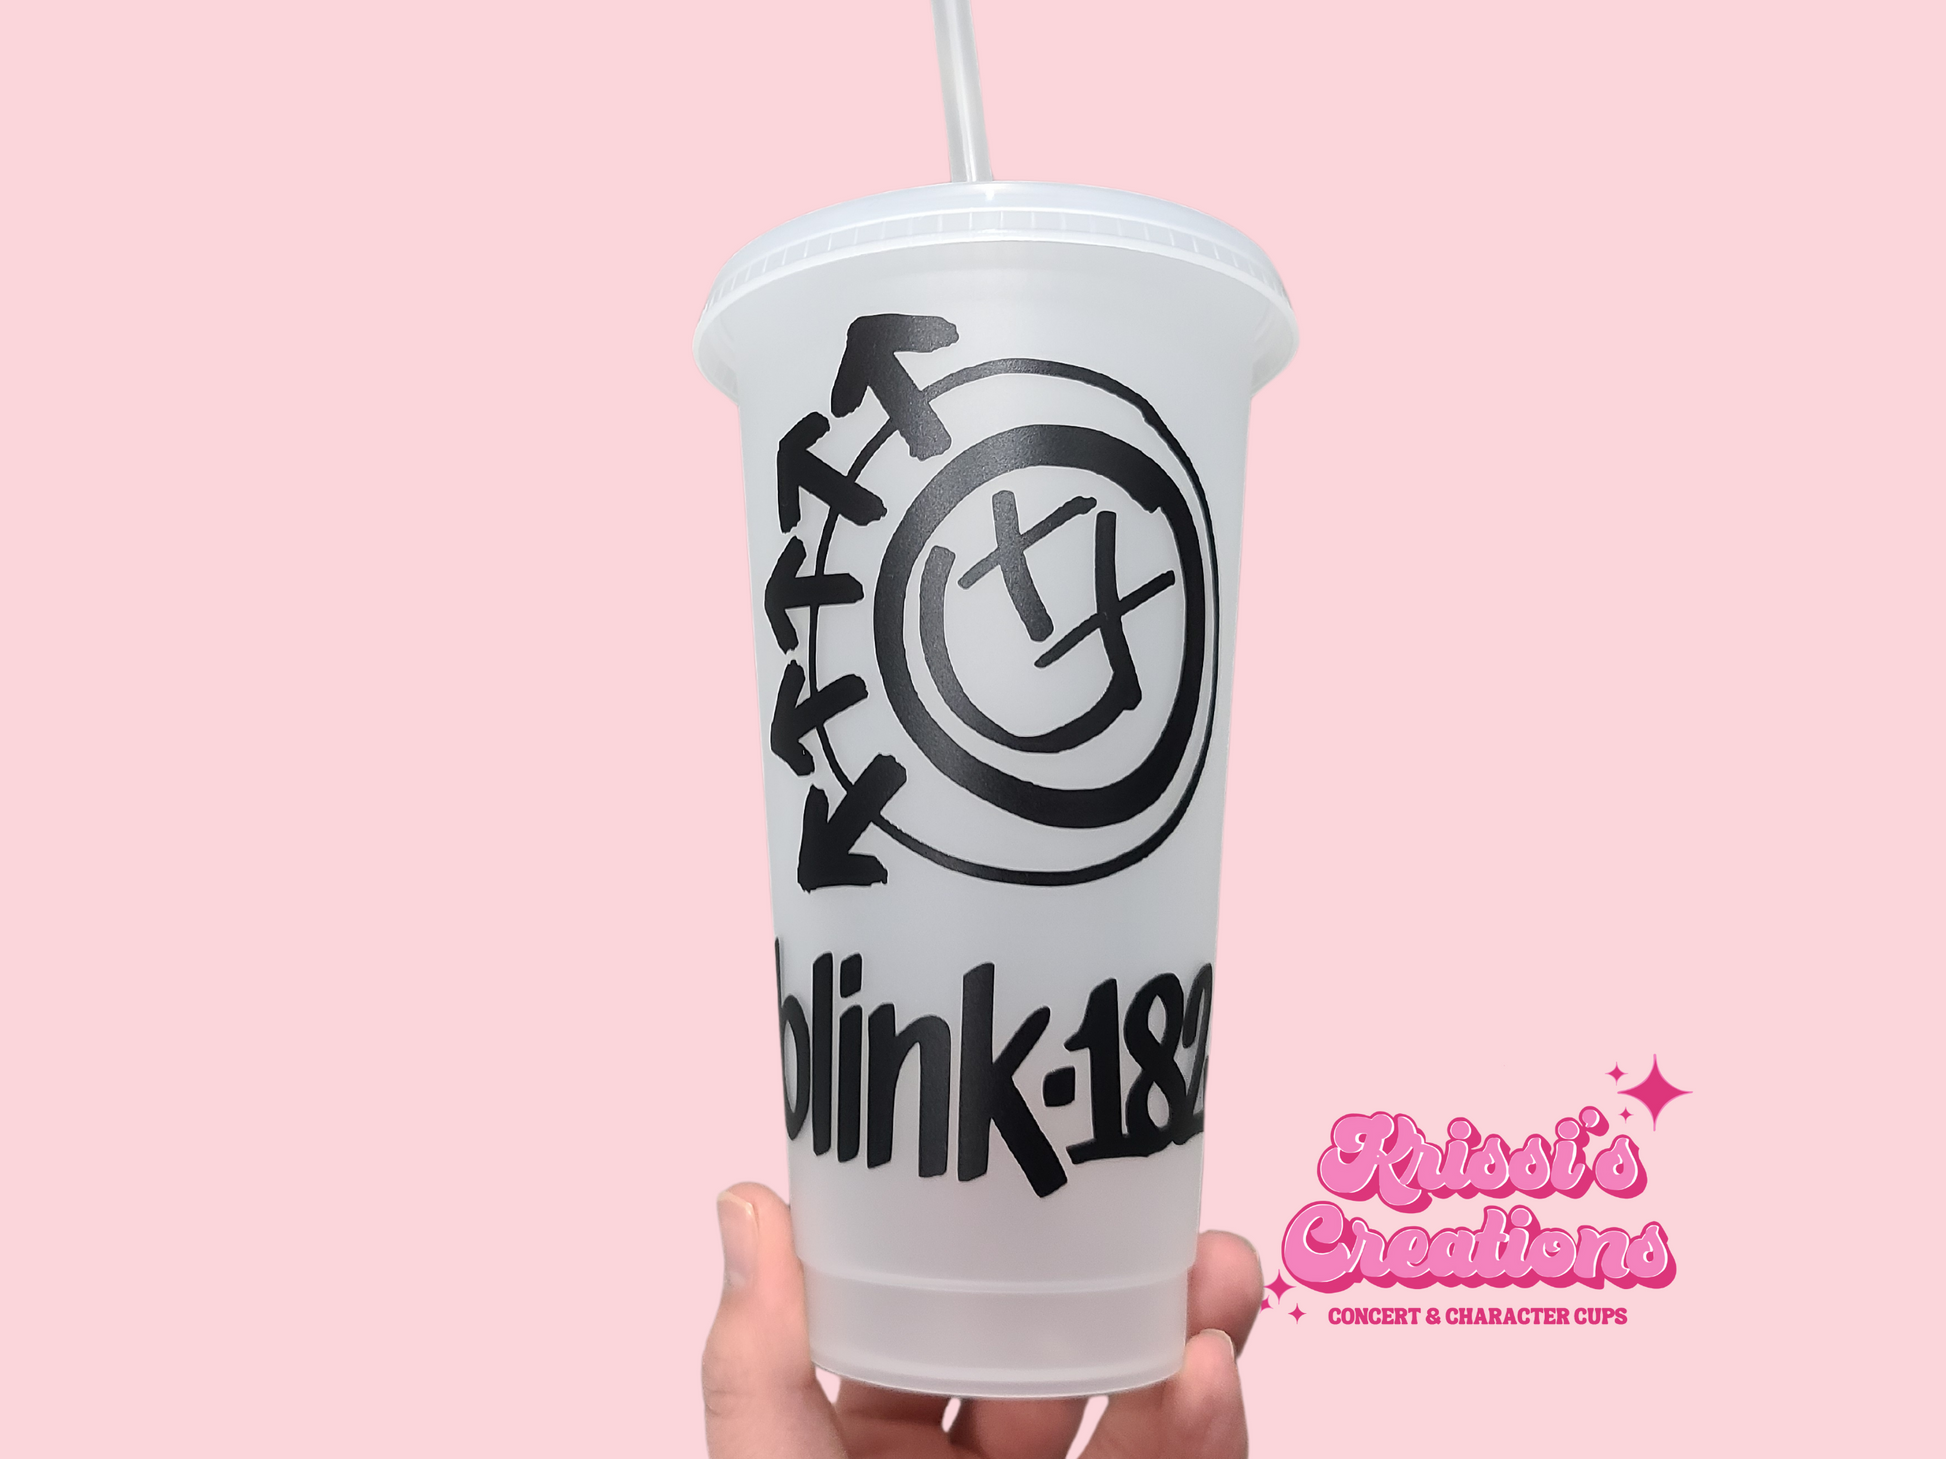 A frosted plastic cup featuring the iconic Blink 182 logo on the front, with a lid and straw included.